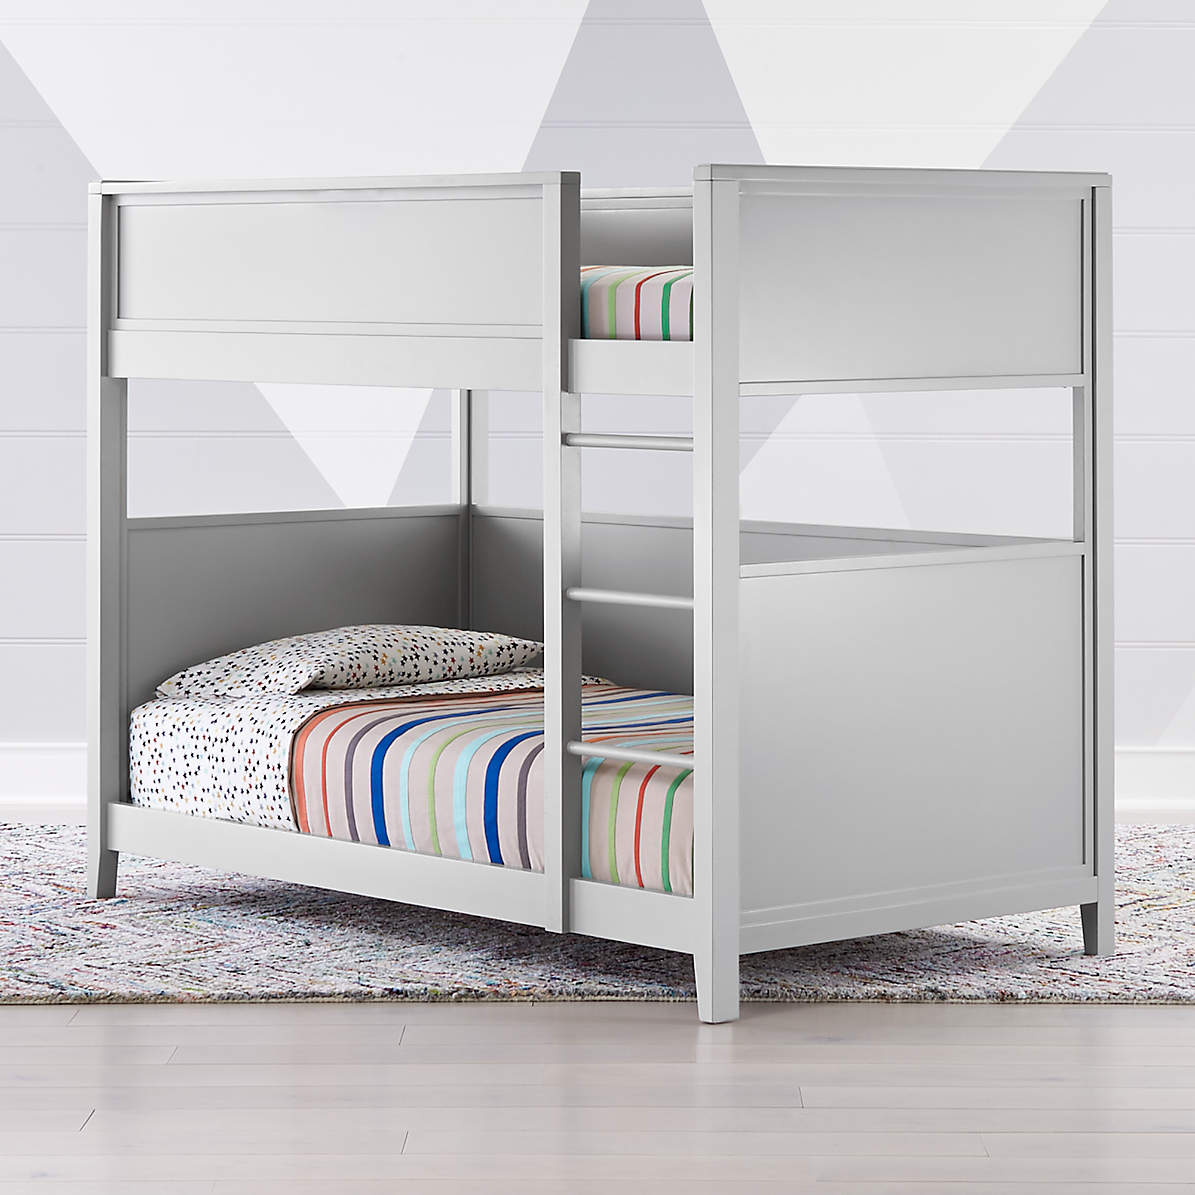 Small Space Kids Twin Bunk Bed, Specialty Bunk Beds